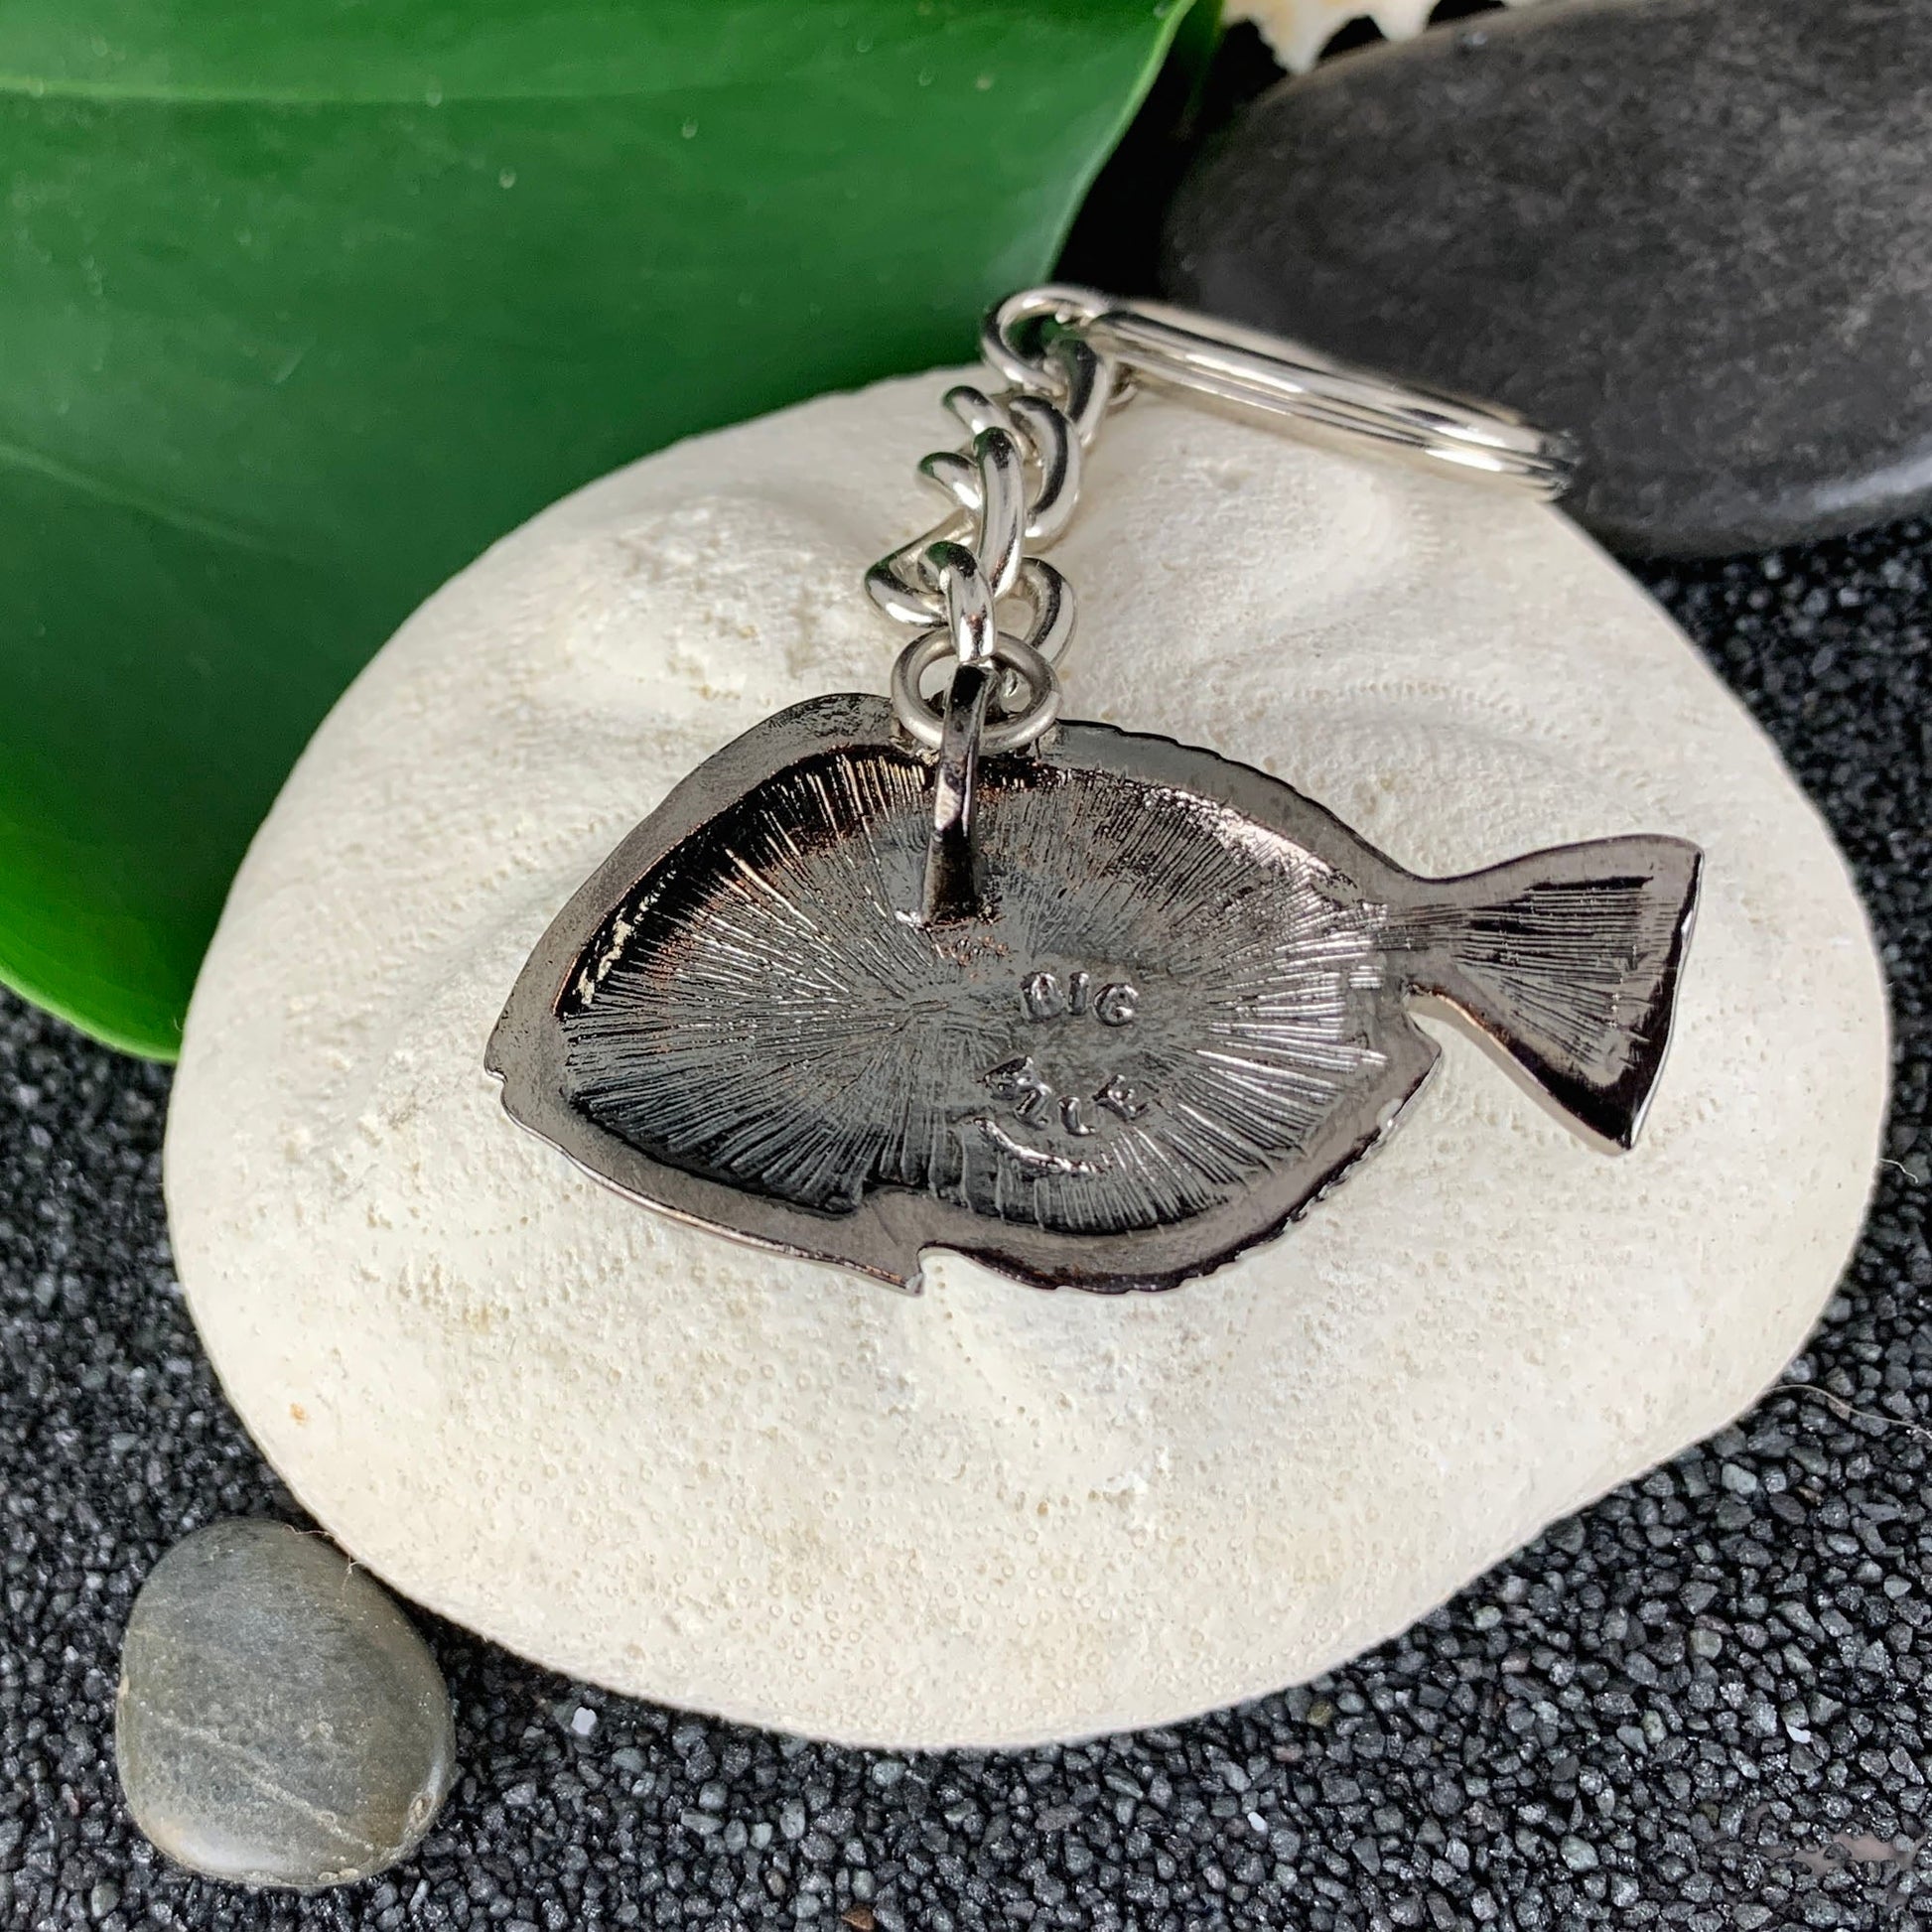 Blue Tang Keychain for Women and Teens-Key Chain Gifts, Blue Tang Key Ring, Blue Tang Charm, Gift for Ocean Lover, Pewter Keychain - The Tool Store